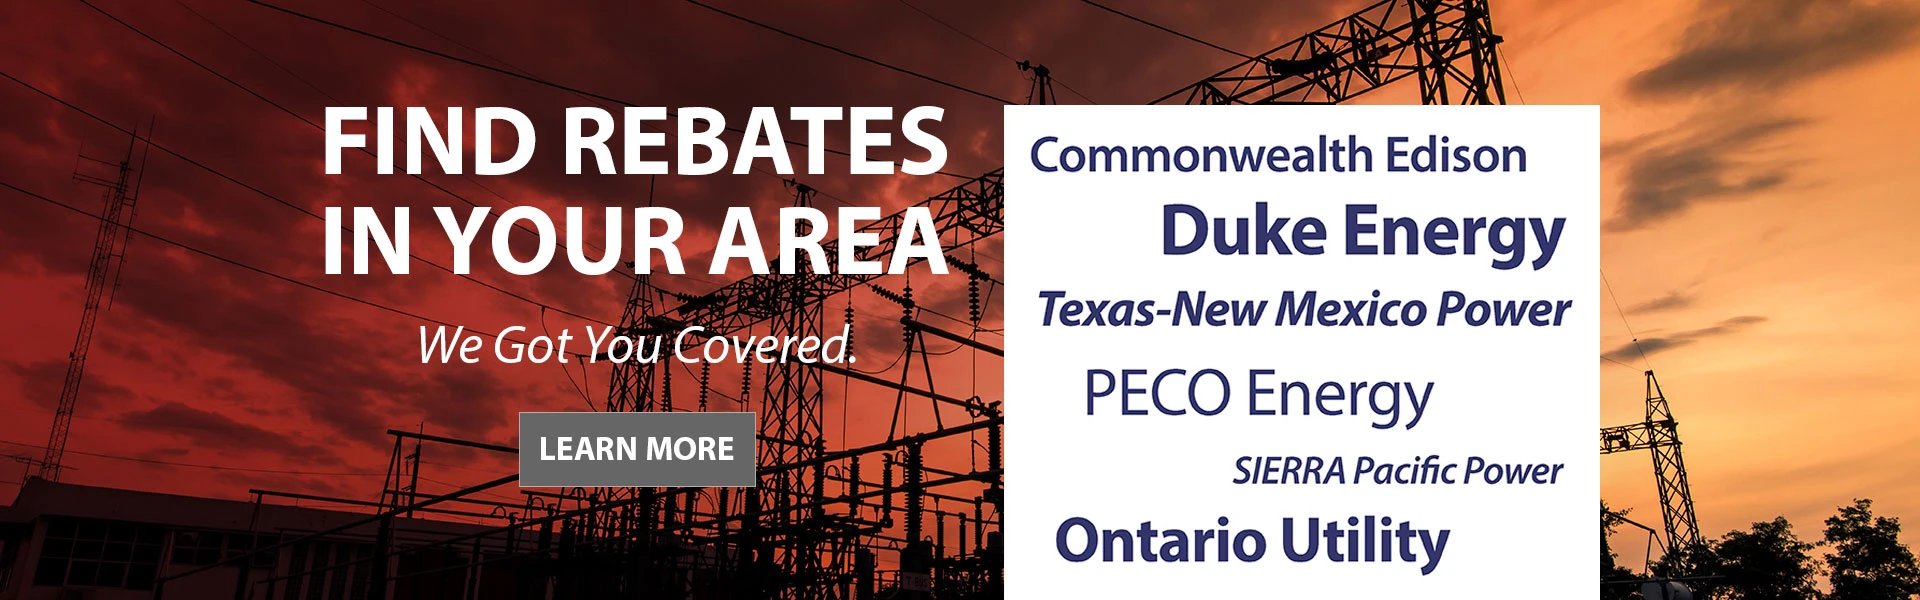 Find Rebates In Your Area - We got you covered. - Commonwealth Edison - Duke Energy - Texas-New Mexico Power - PECO Energy - SIERRA Pacific Power - Ontario Utility